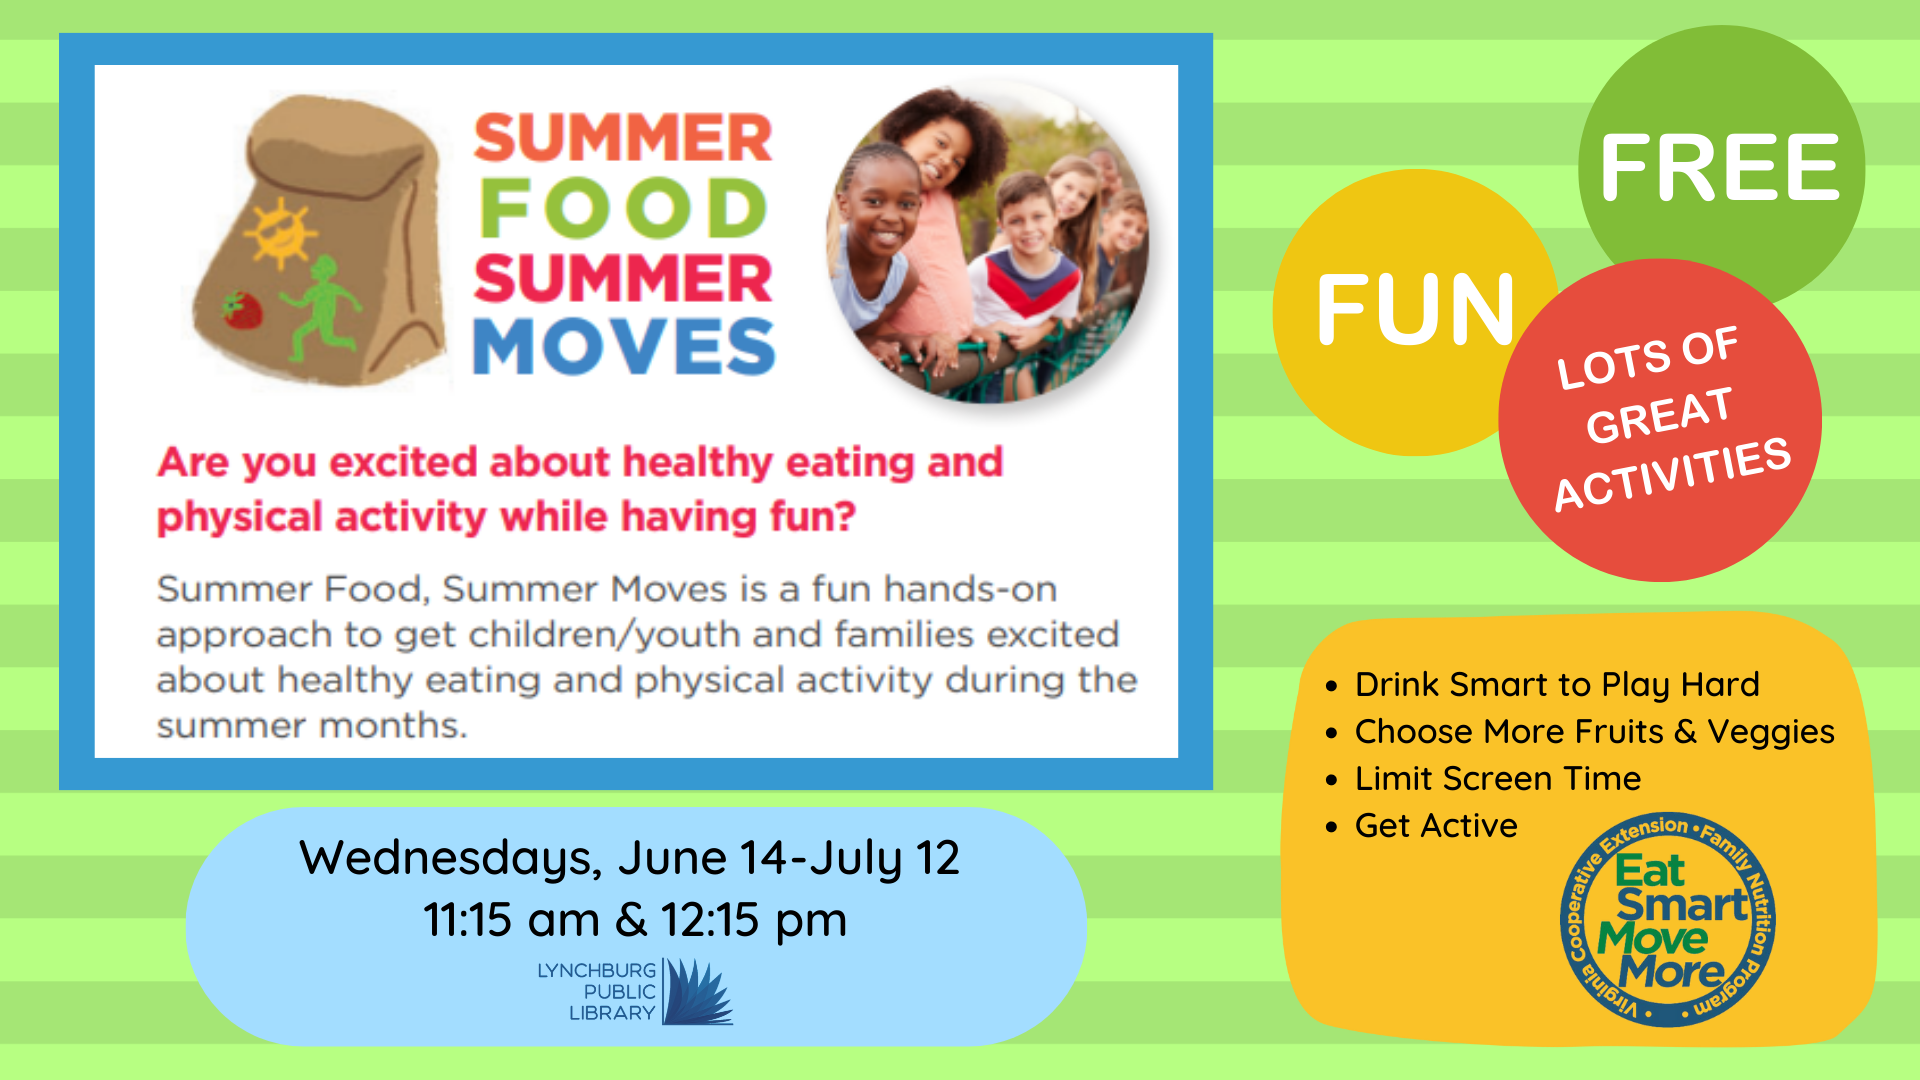 Summer food summer moves, Wednesdays, June 14 to July 12 at 11:15 am or 12:15 pm. Fun, hands-on approach to get children/youth and families excited about healthy eating and physical activity during the summer months.